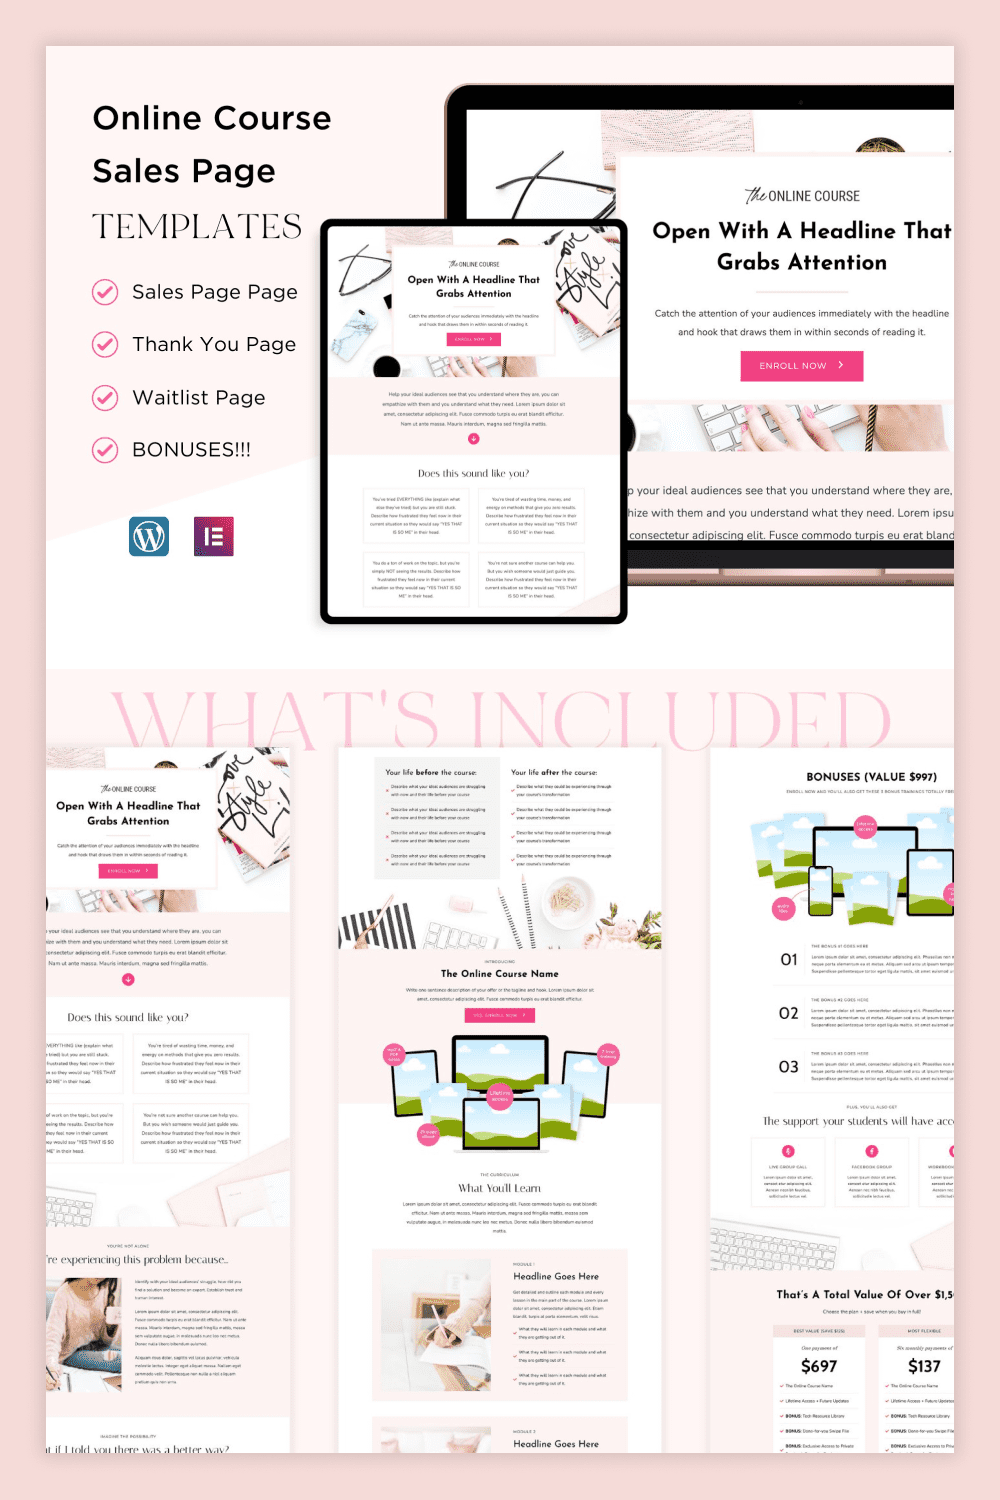 A collage of landing page screenshots in pink colors.